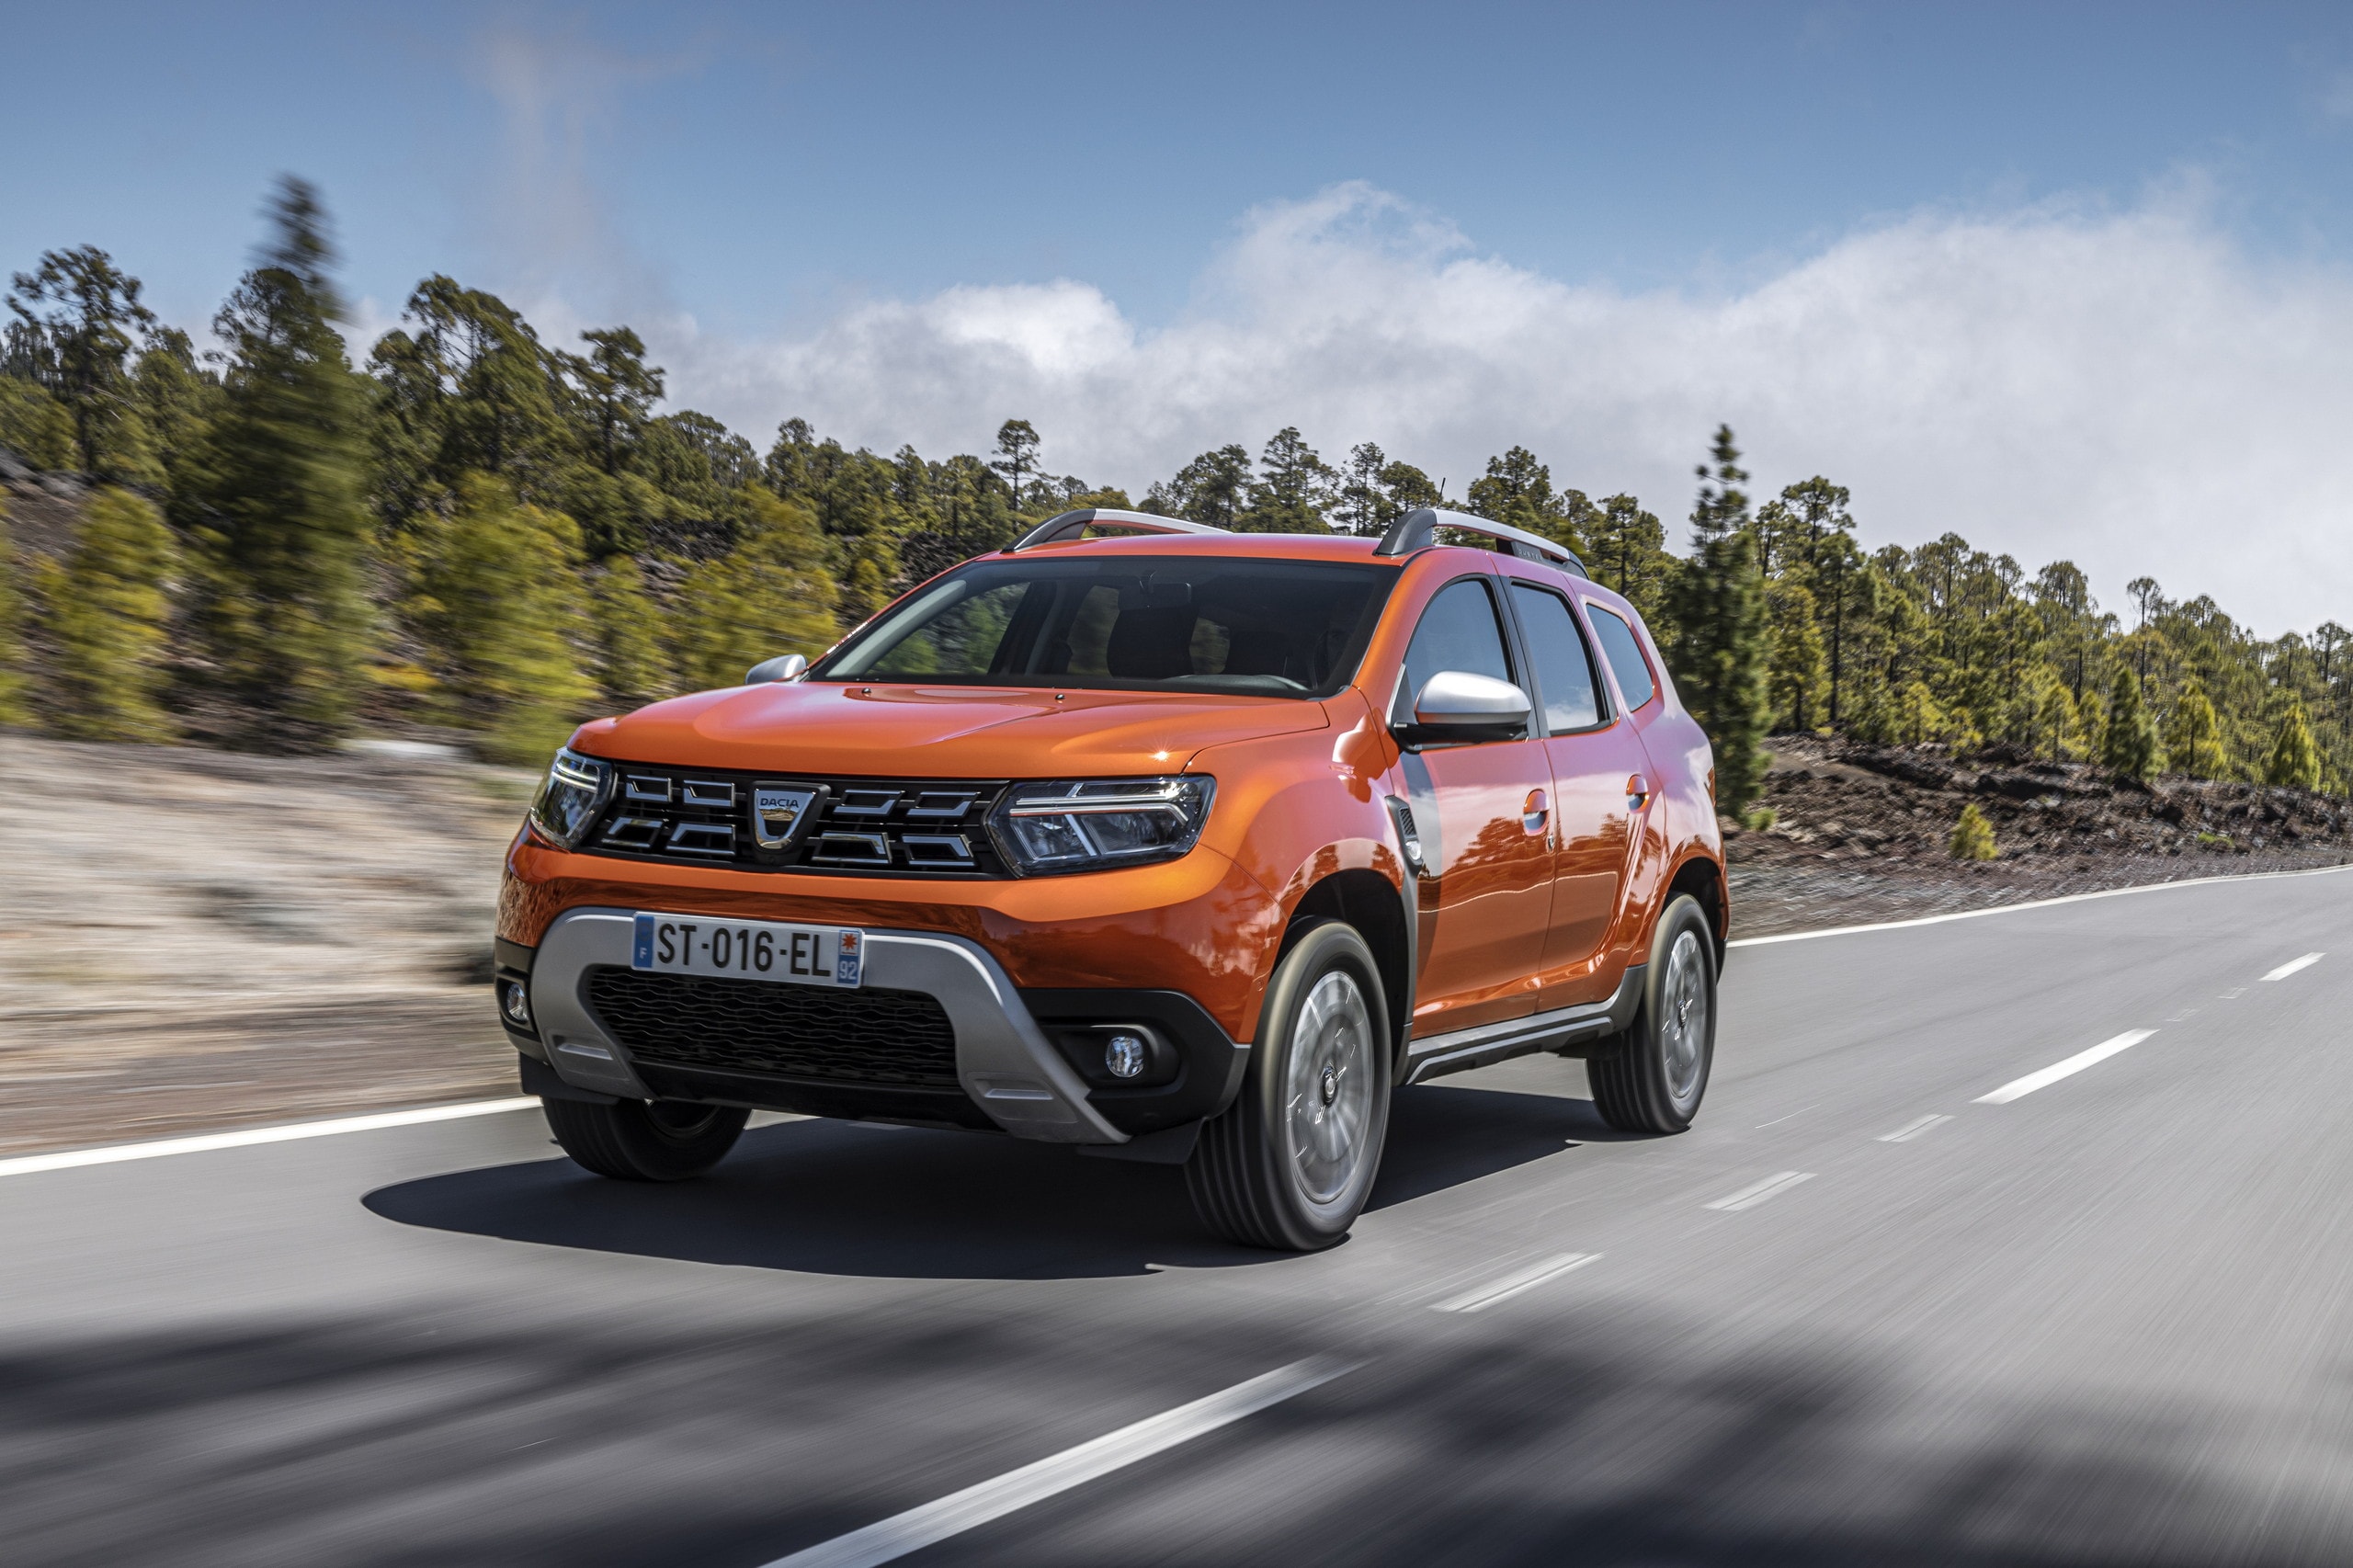 2021 Dacia Duster Is Germany's Most Affordable SUV, Costs Less